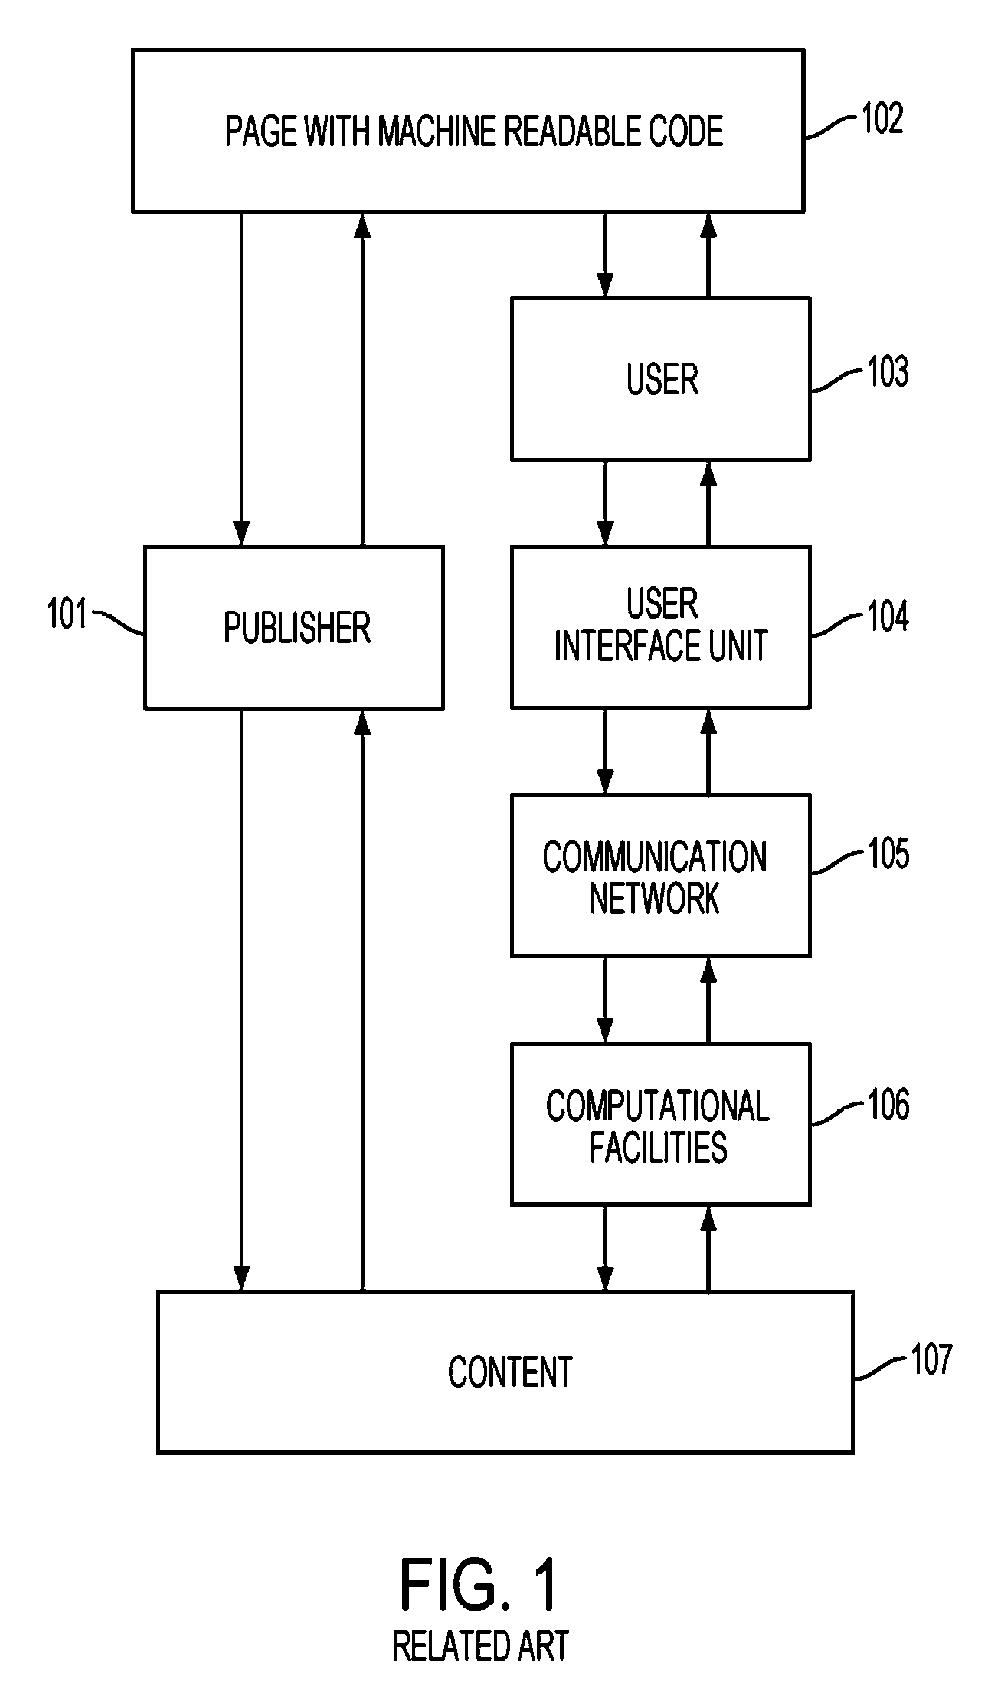 System and method for reliable content access using a cellular/wireless device with imaging capabilities